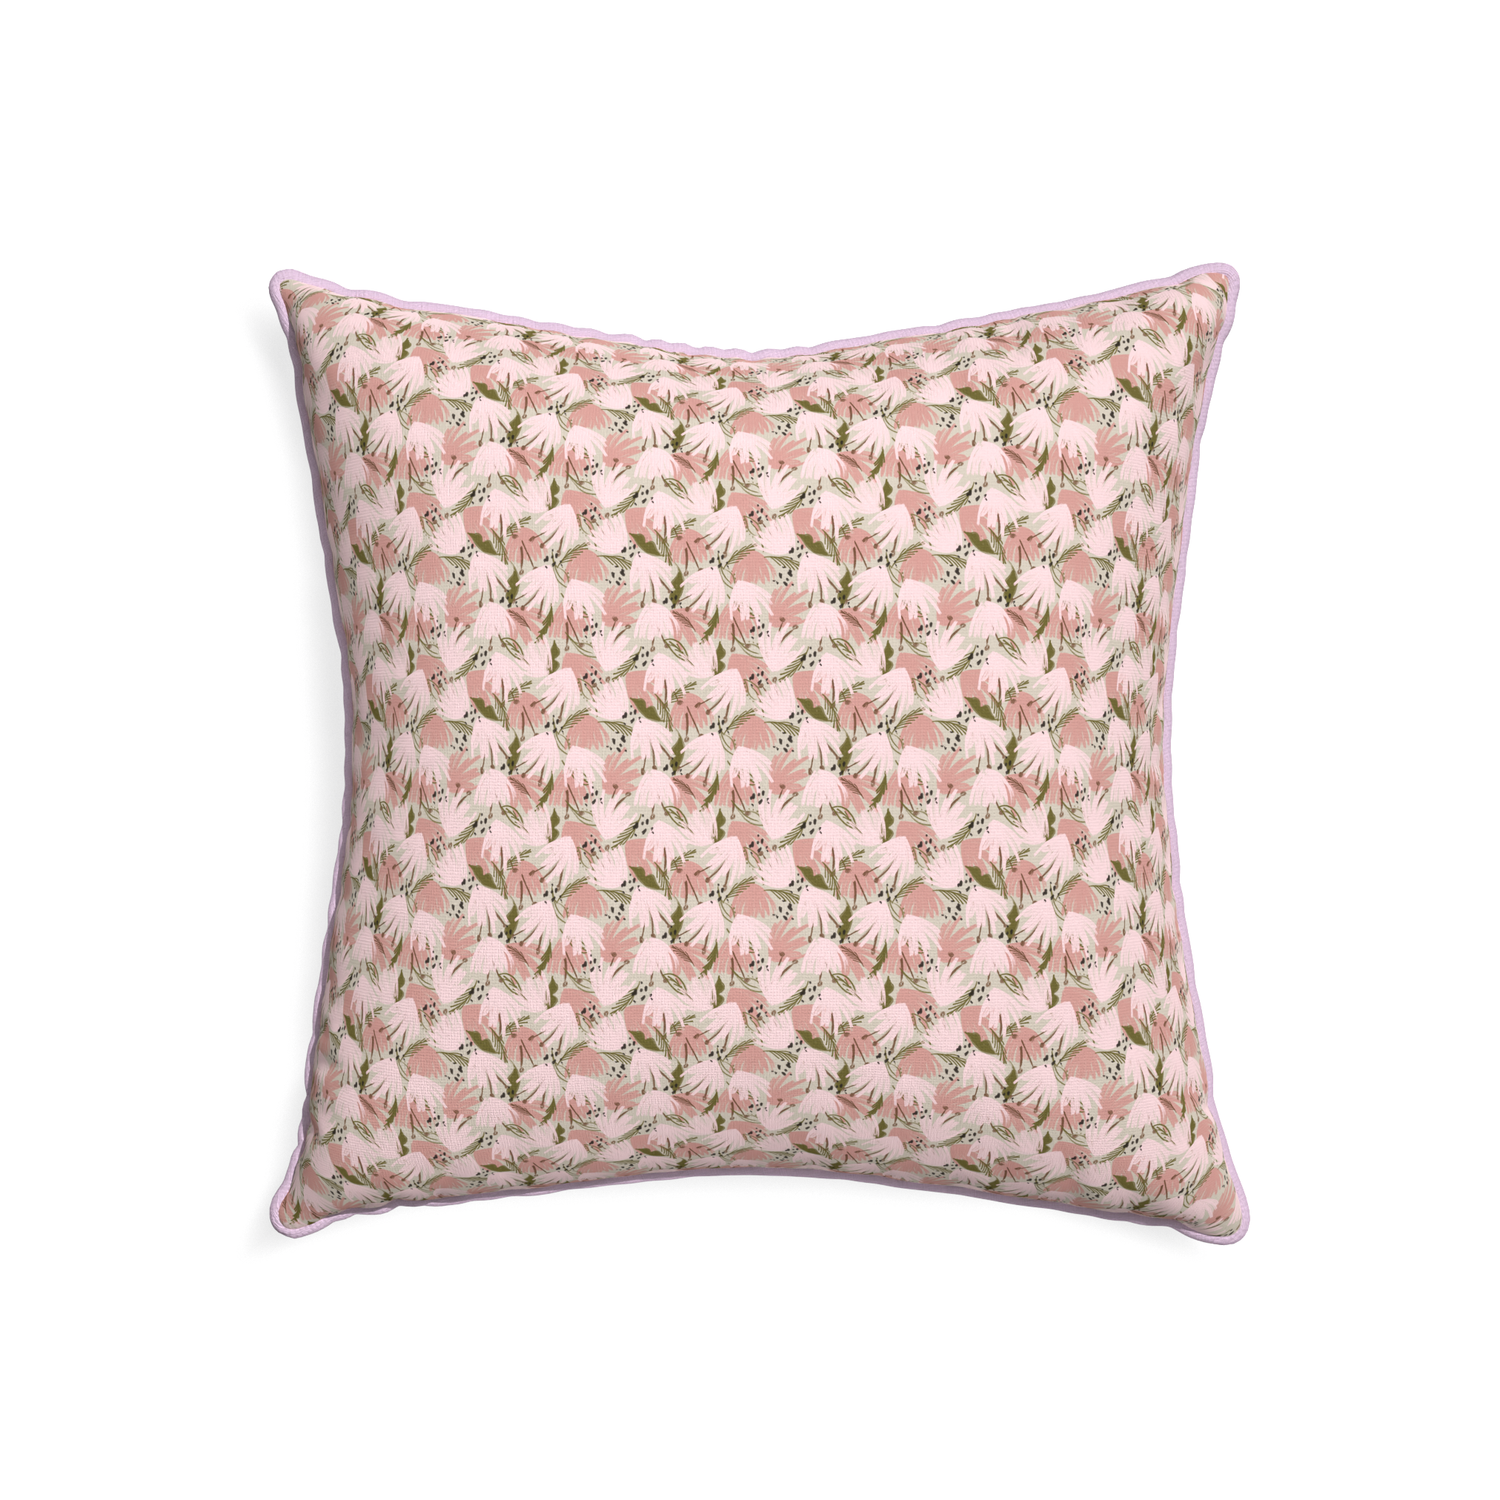 22-square eden pink custom pink floralpillow with l piping on white background